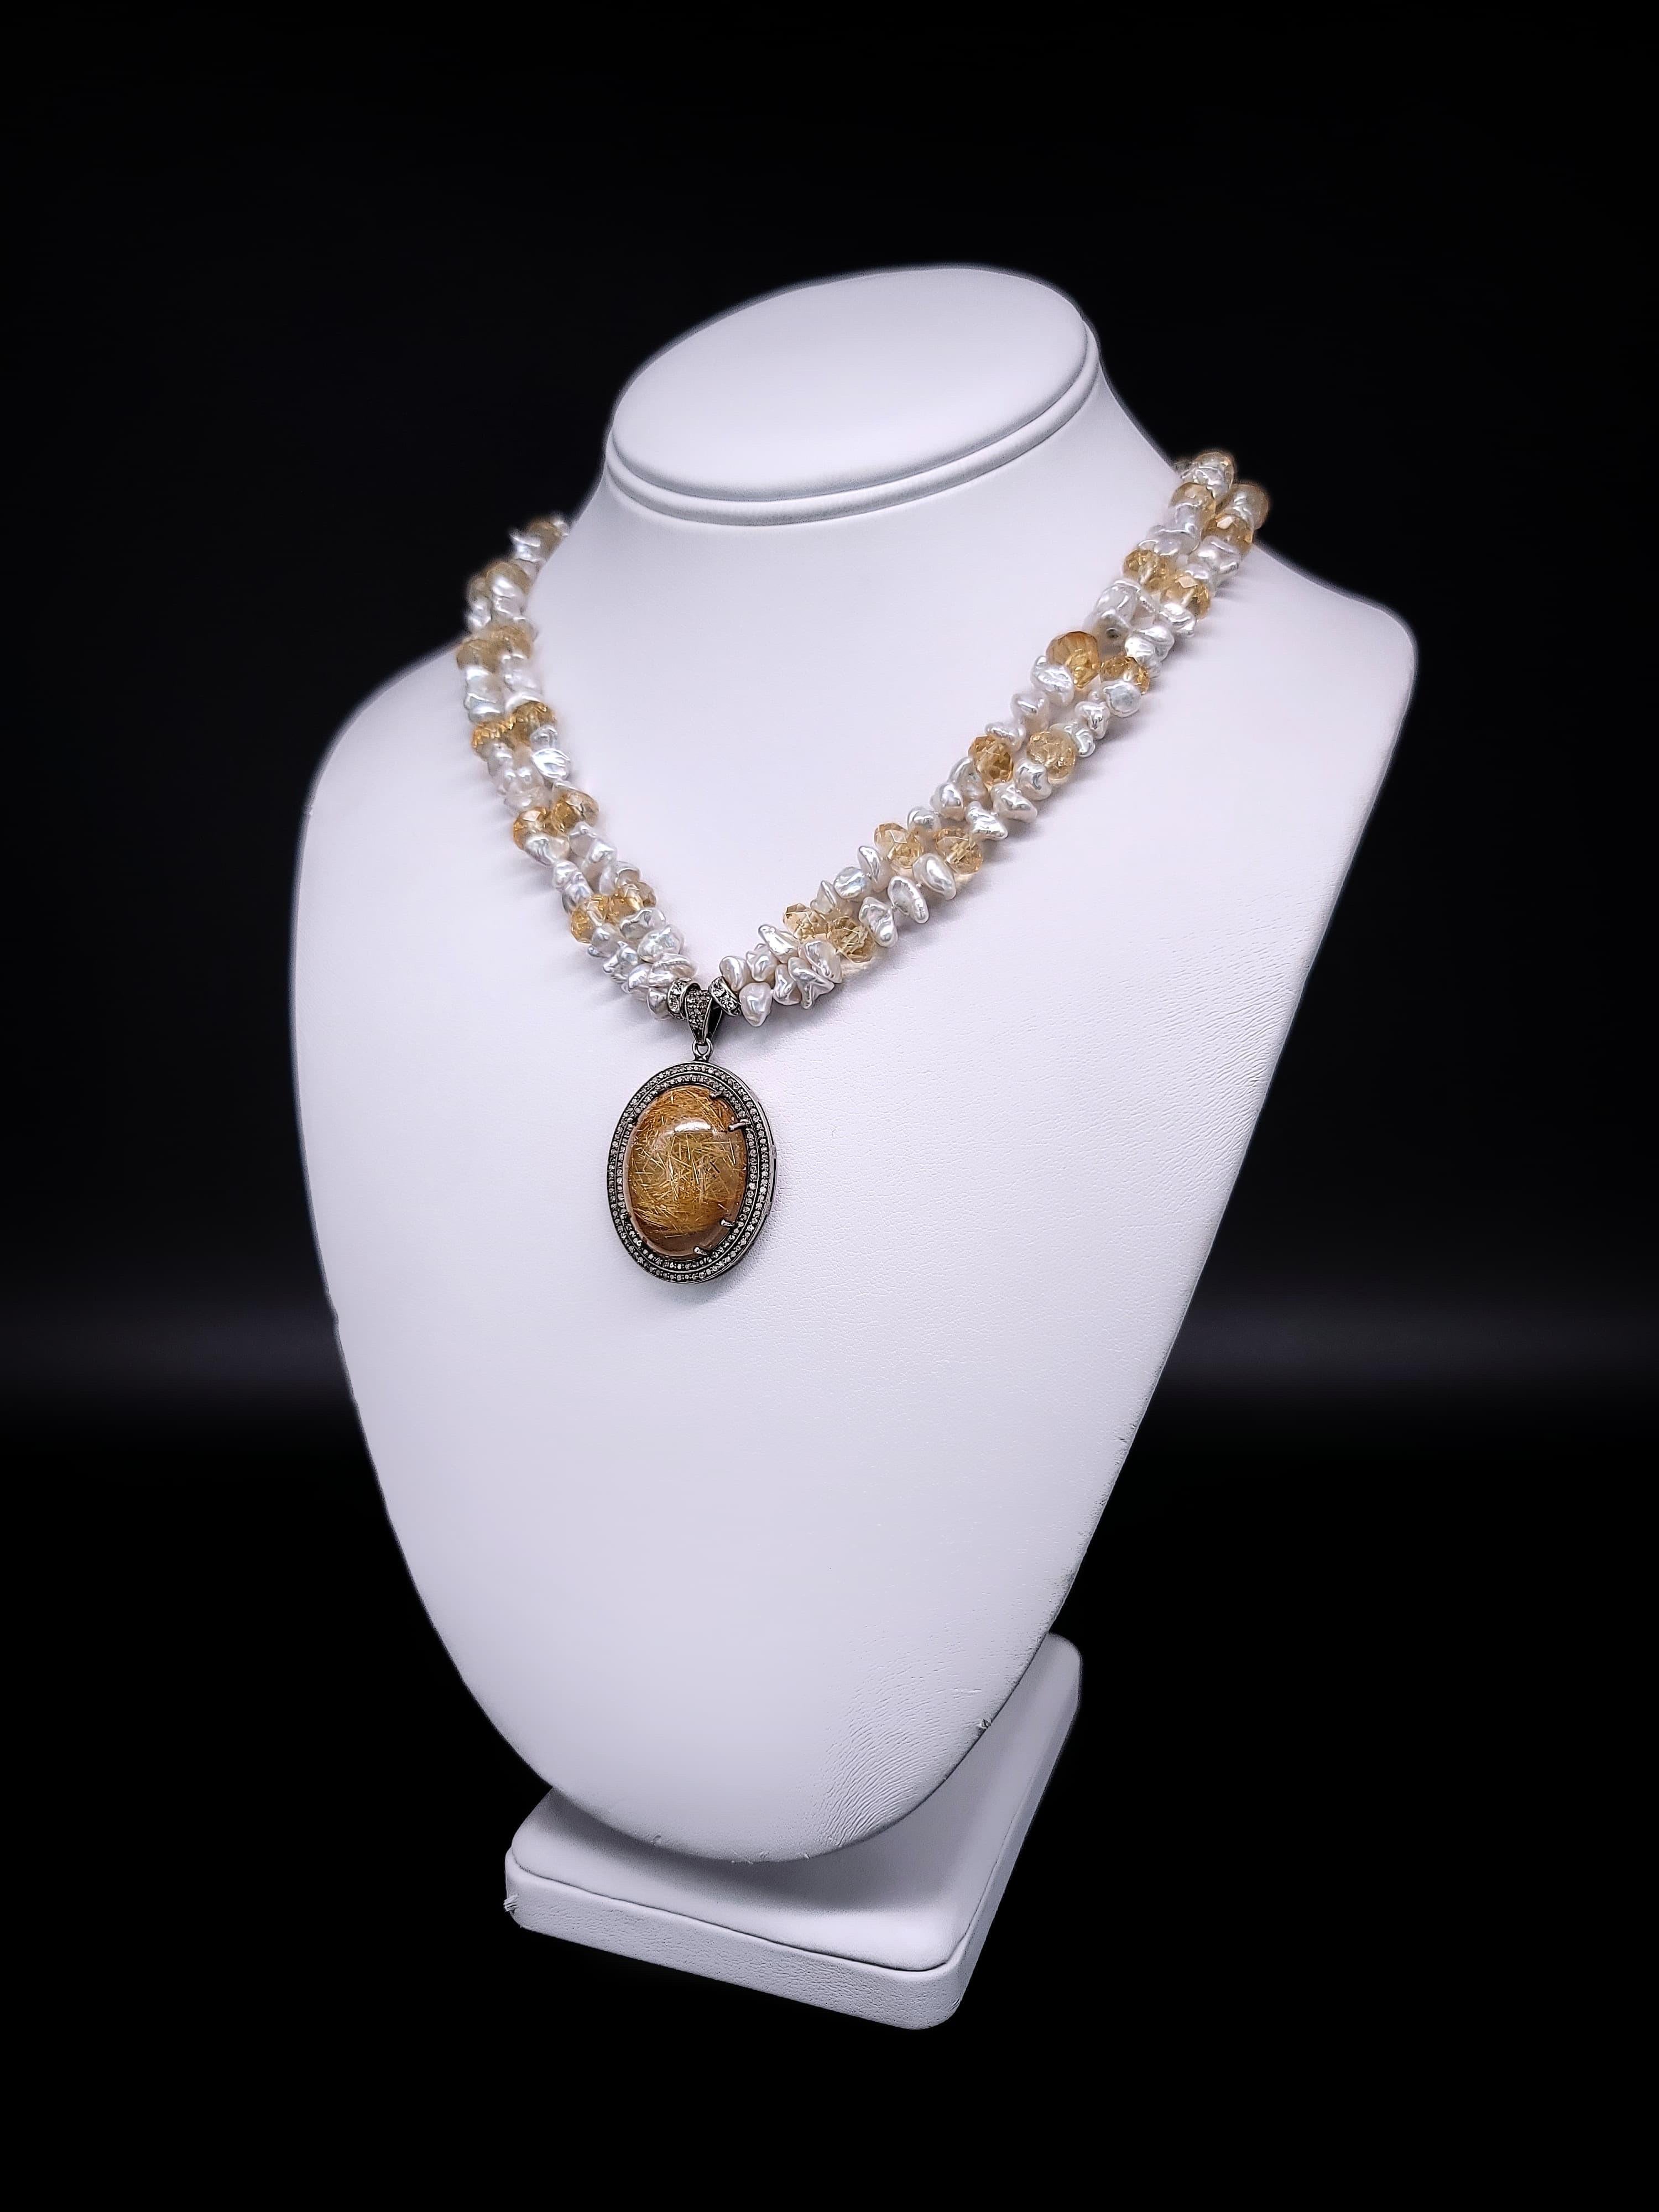 This one-of-a-kind necklace is a true masterpiece by Elaine Silverstein, showcasing the natural beauty and elegance of Rutilated Quartz. The centerpiece of the necklace is a large dome-shaped Rutilated Quartz, perfectly encircled by a stunning array